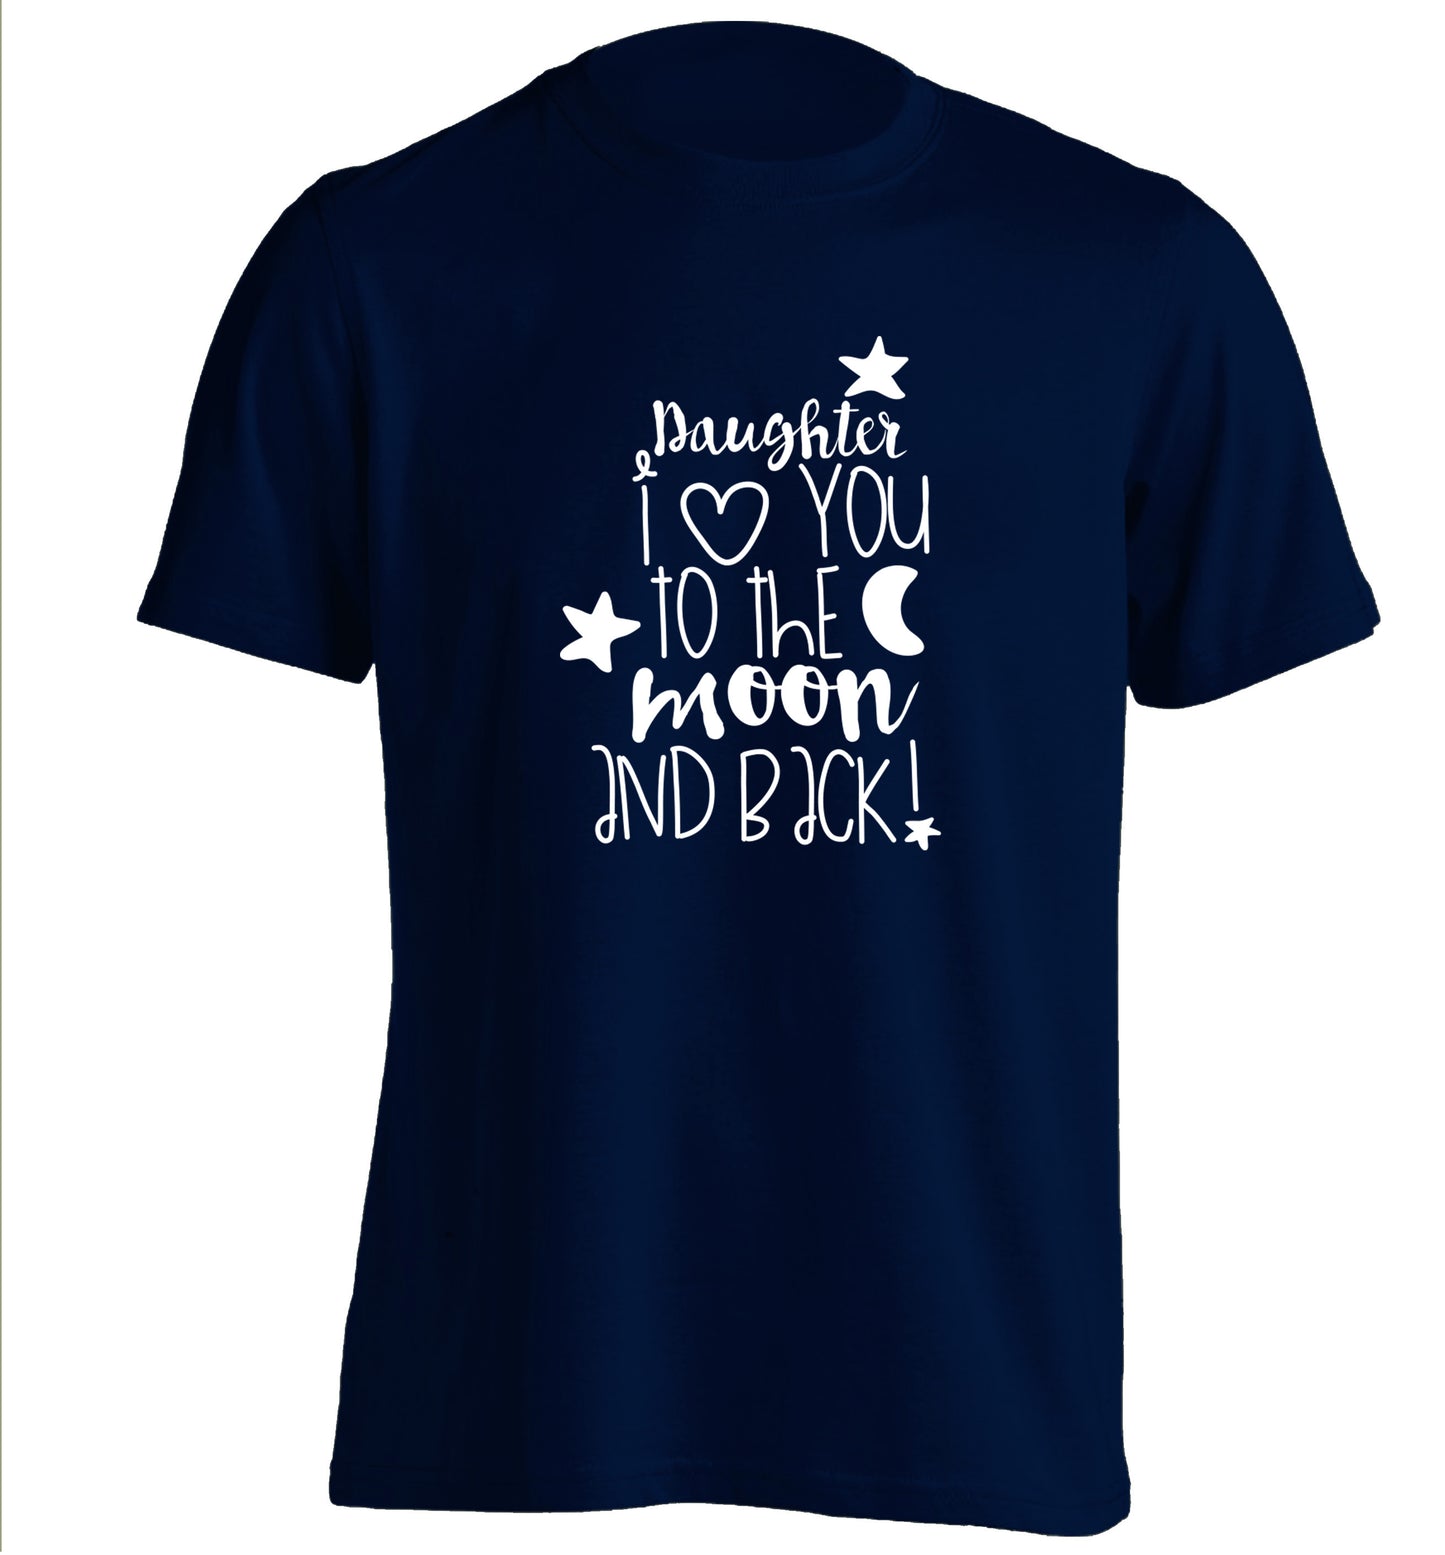 Daughter I love you to the moon and back adults unisex navy Tshirt 2XL